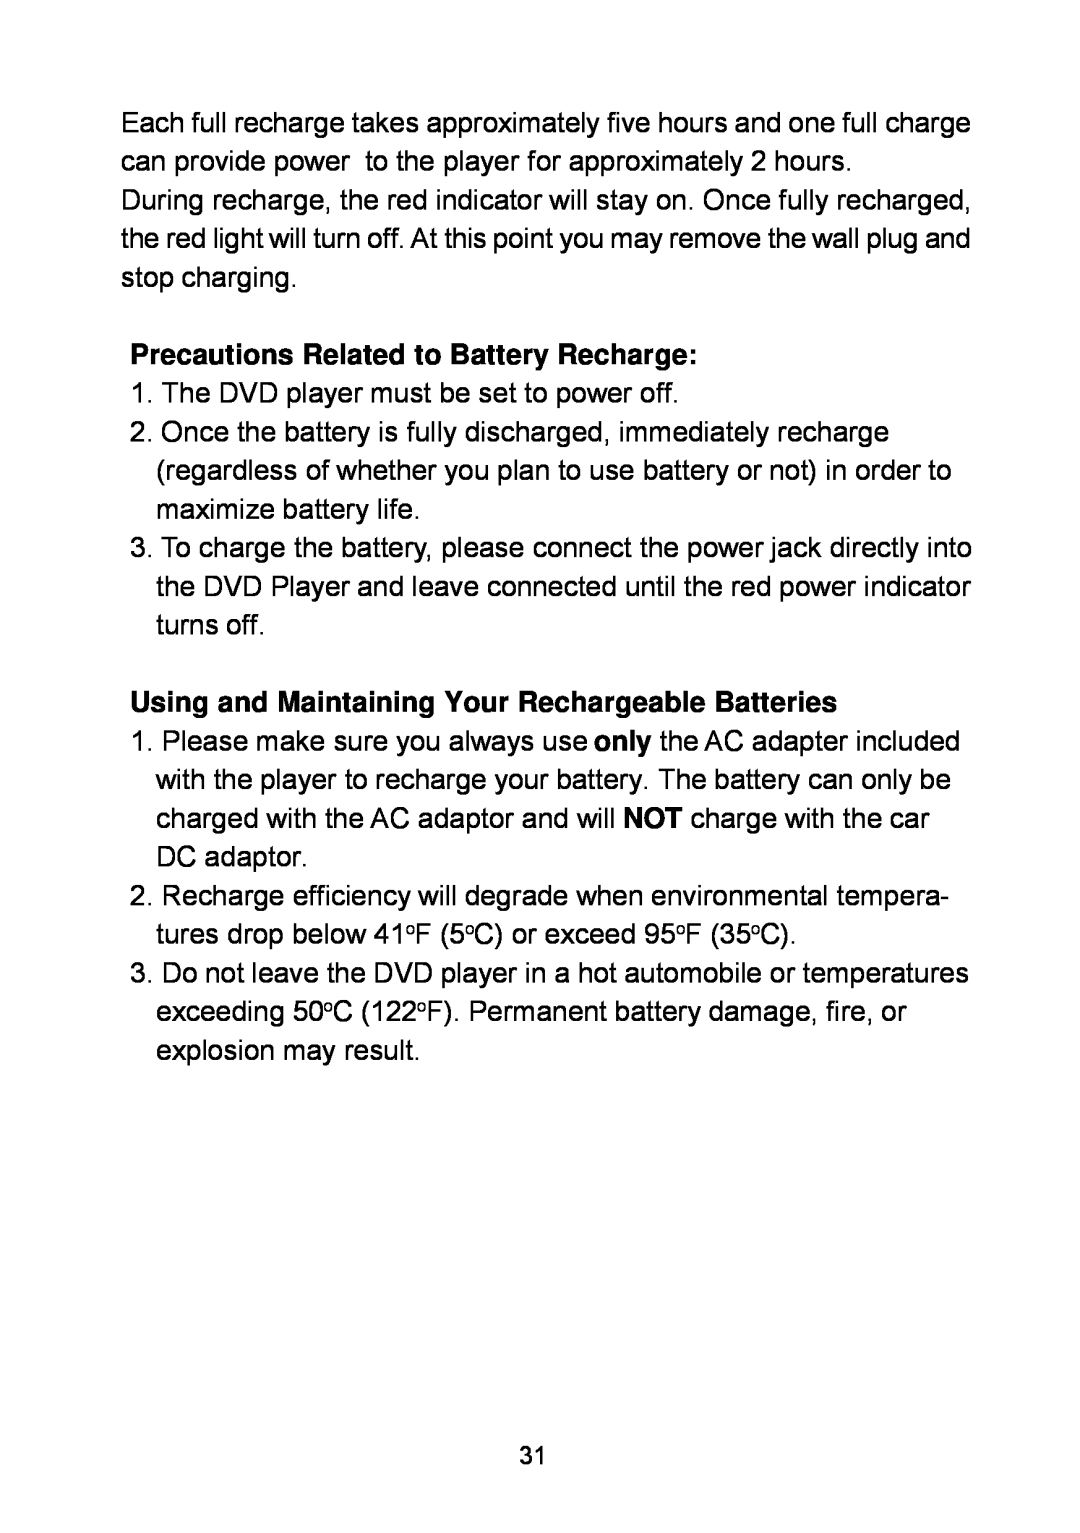 Audiovox D1929B manual Precautions Related to Battery Recharge, Using and Maintaining Your Rechargeable Batteries 